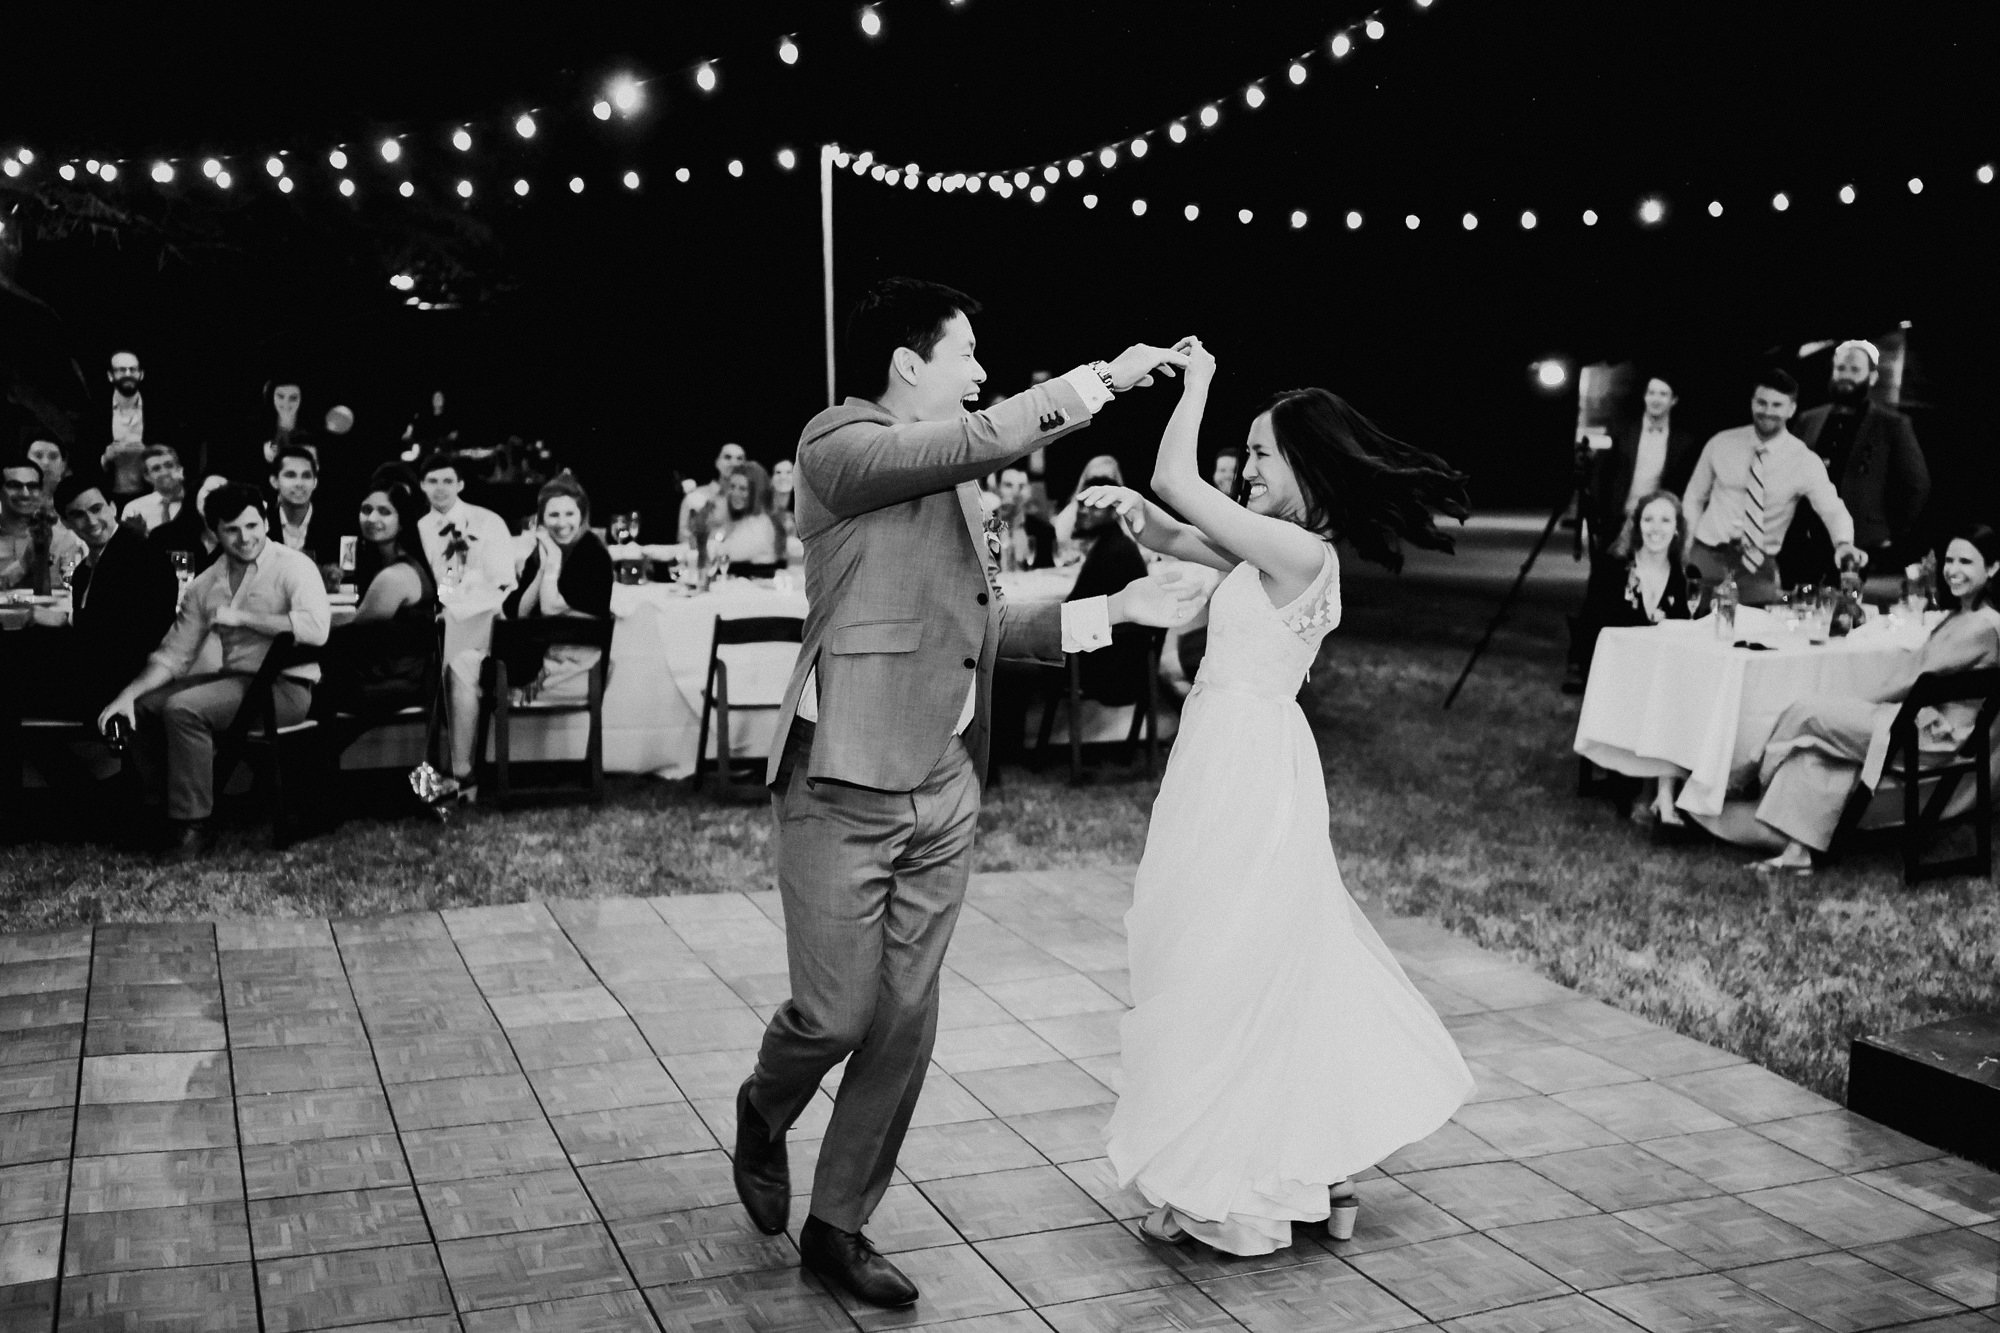 Saguaro Lake Guest Ranch The Perfect Location for a Laid-Back Fun-Filled Wedding. The best documentary wedding photographer Mantas Kubilinskas-55.jpg